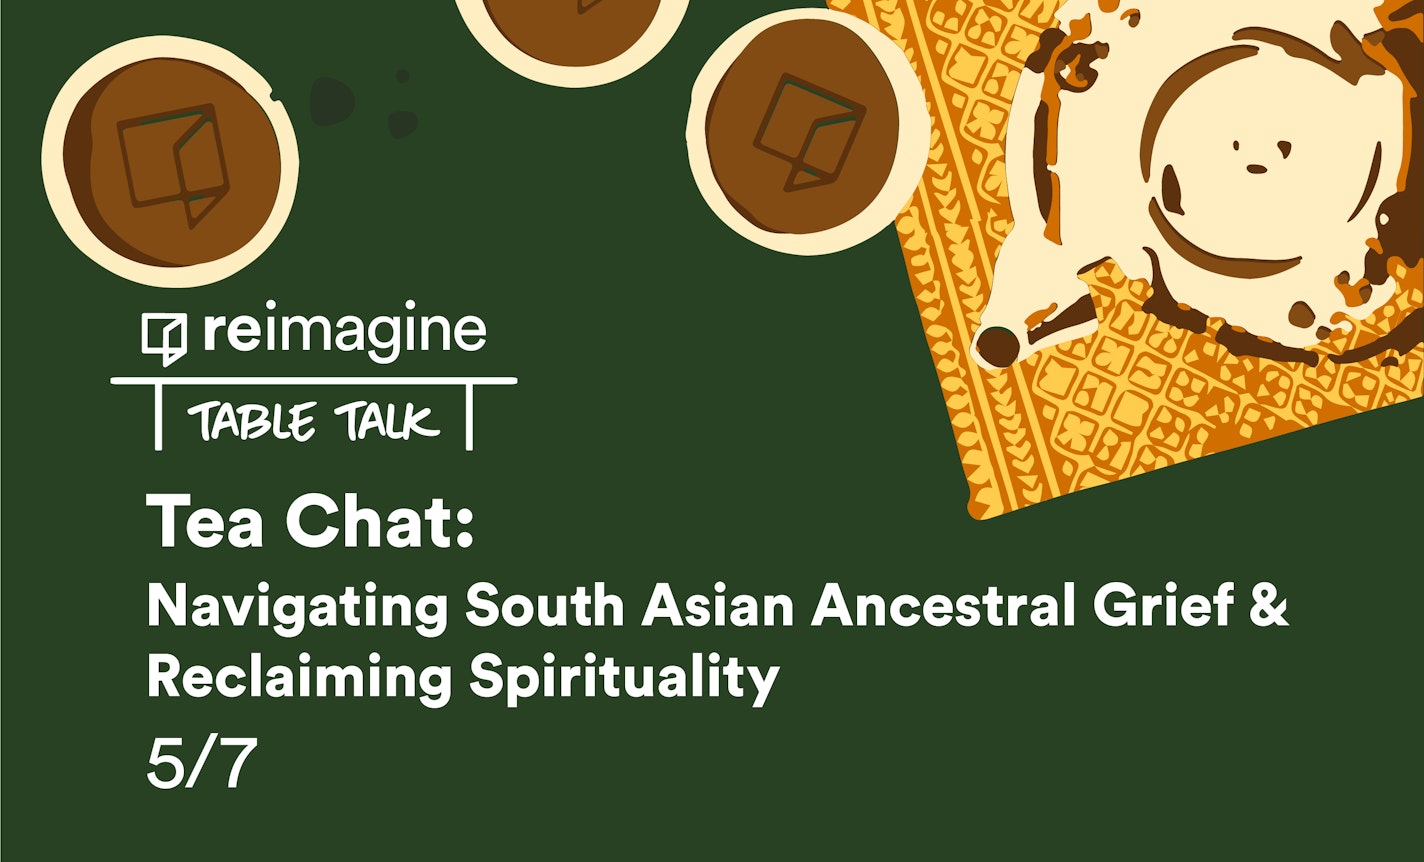 Tea Chat: Navigating South Asian Ancestral Grief